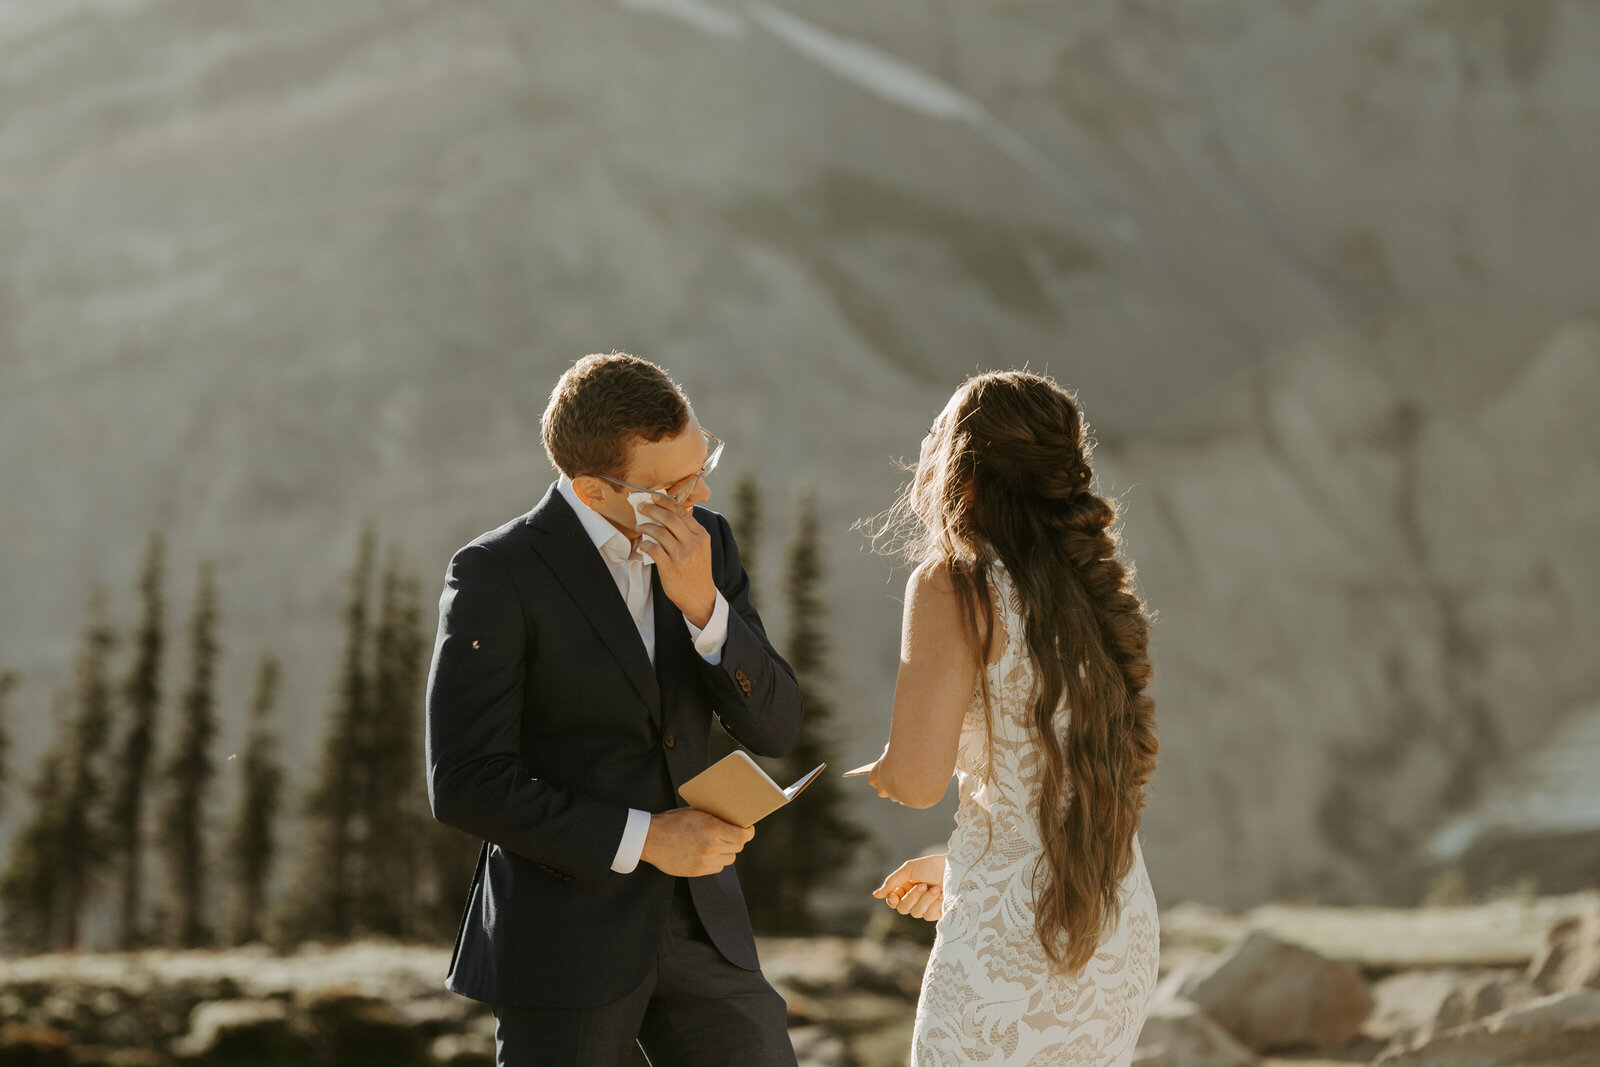 Groom wiping his tears in front of his bride while they read their private vows to each other in Mount Rainier National Park